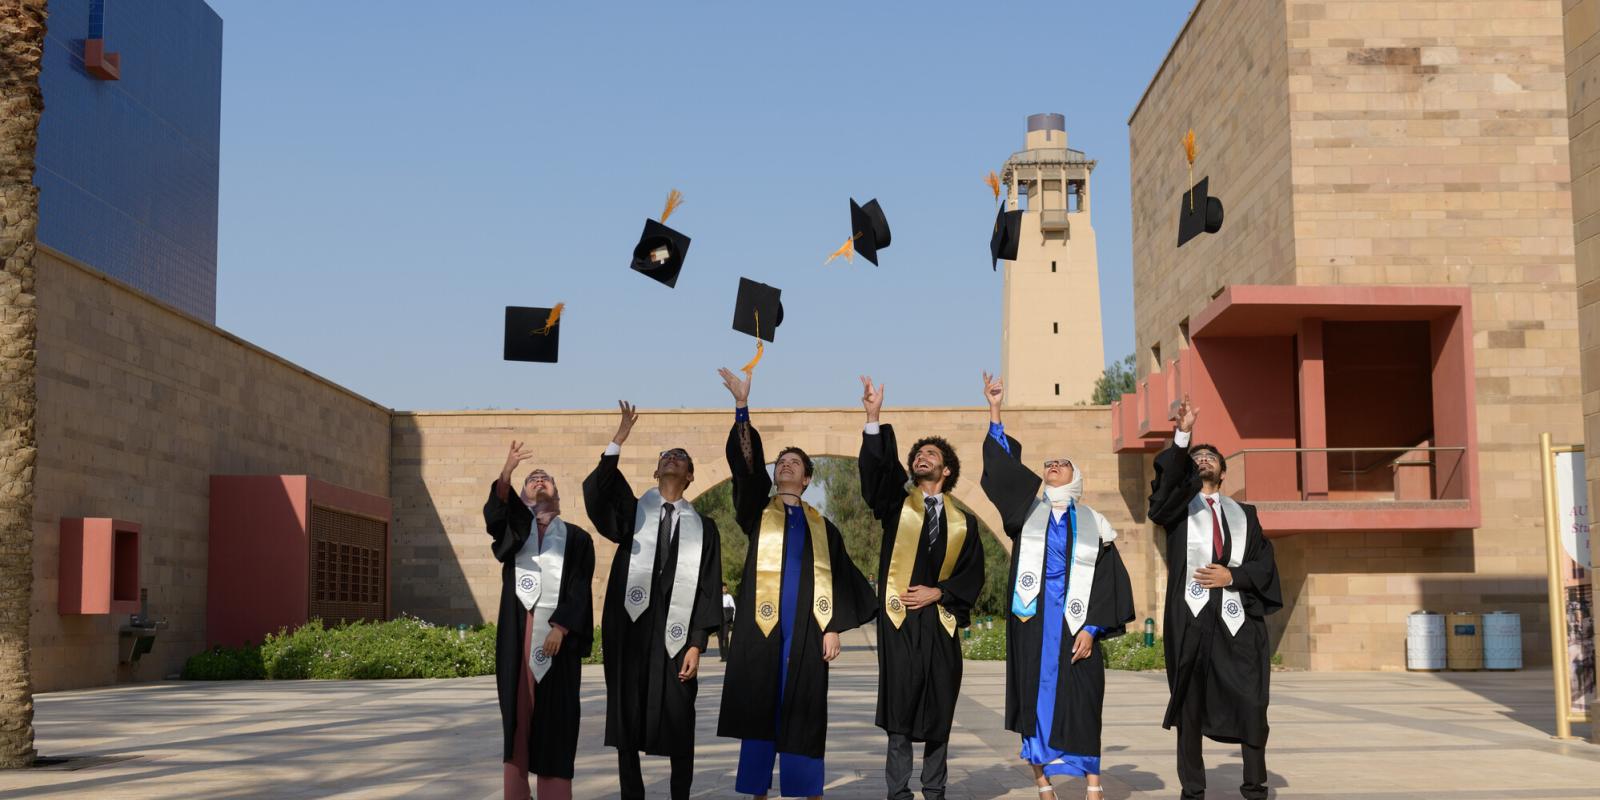 A group of students wearing gowns and throwing their cap in the air on ϲͼ campus